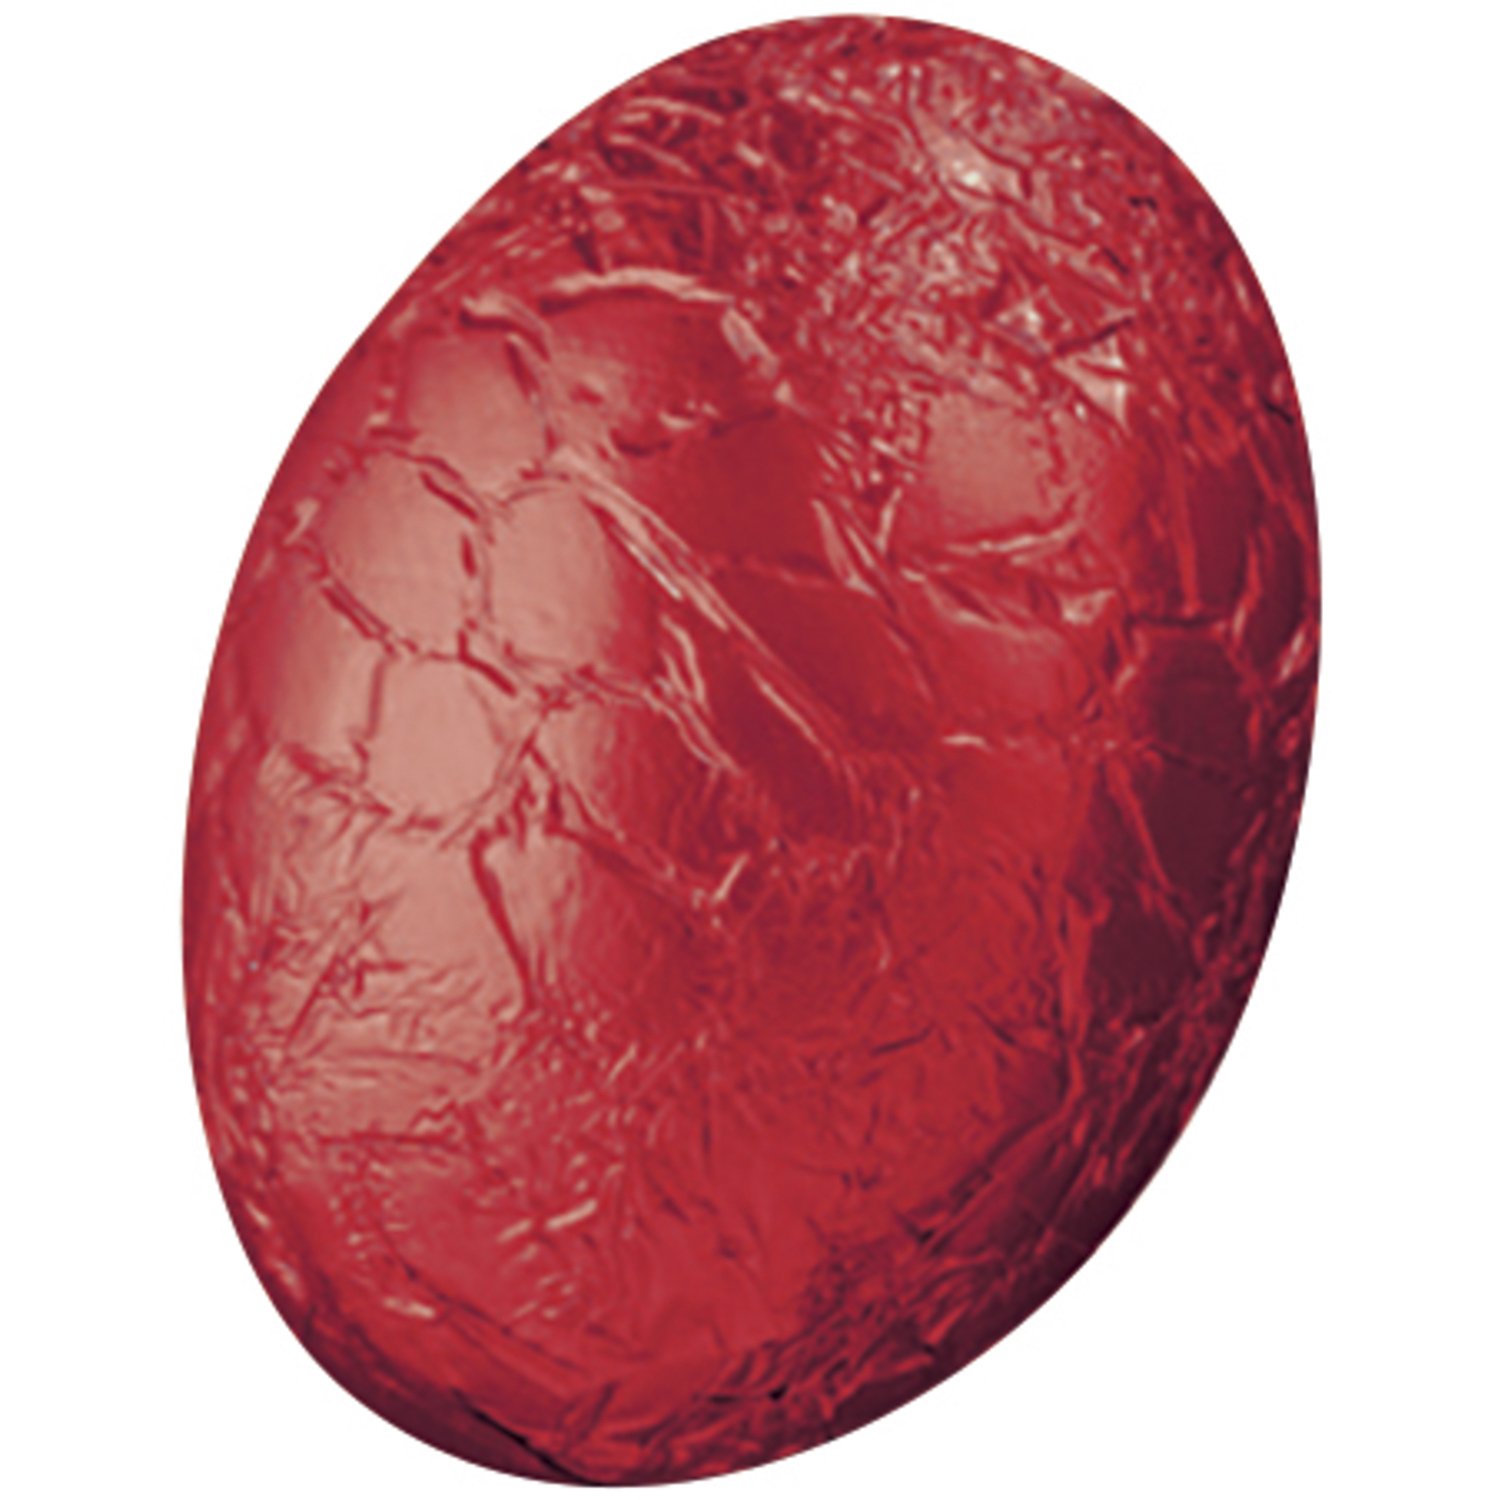 Milk choc mini eggs with forest fruits in red foil - app 11g - 2kg